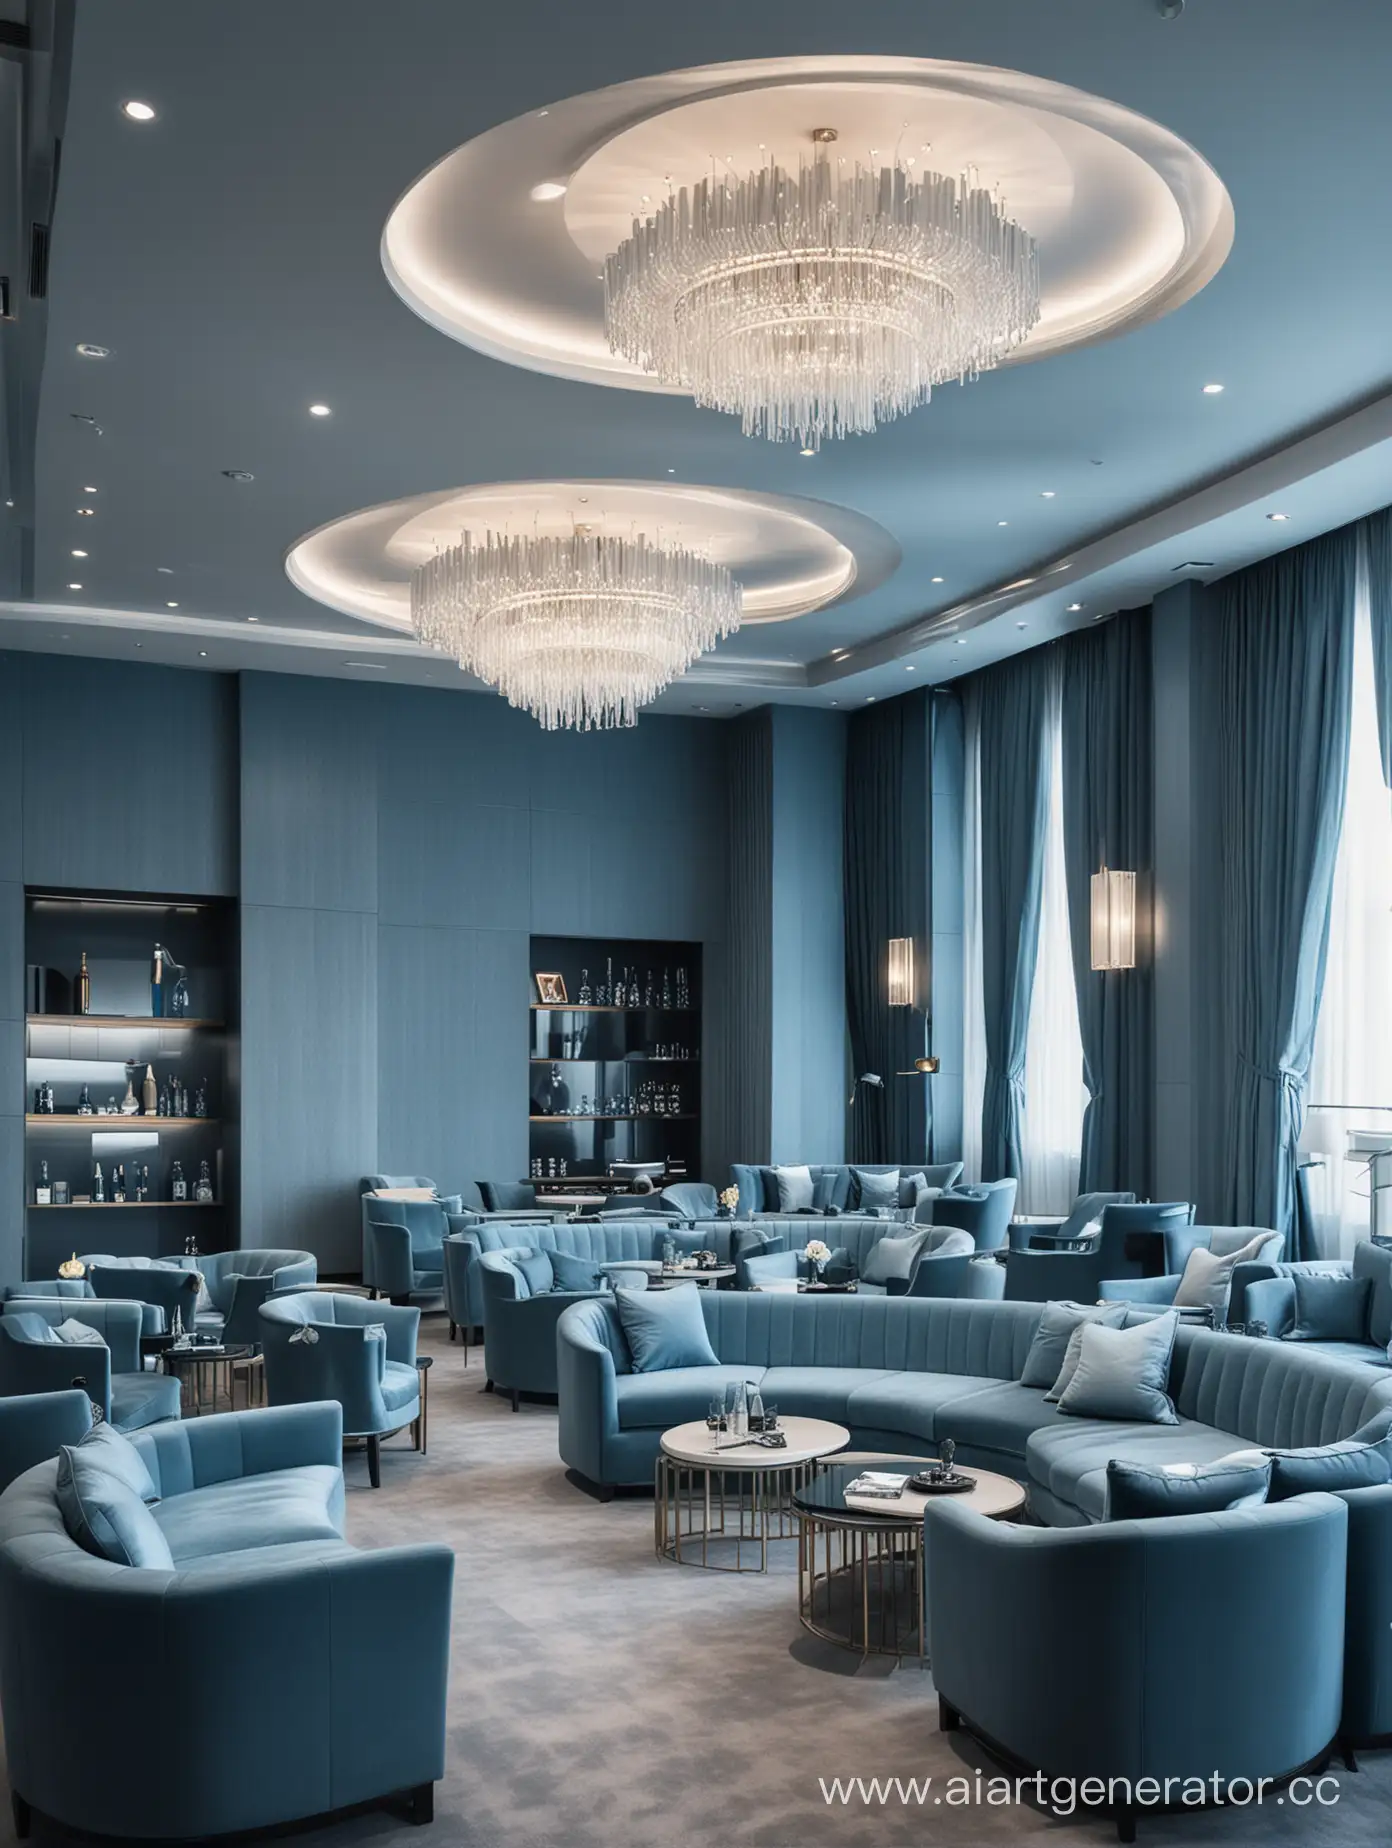 Luxurious-International-VIP-Lounge-with-Cold-Blue-Ambiance